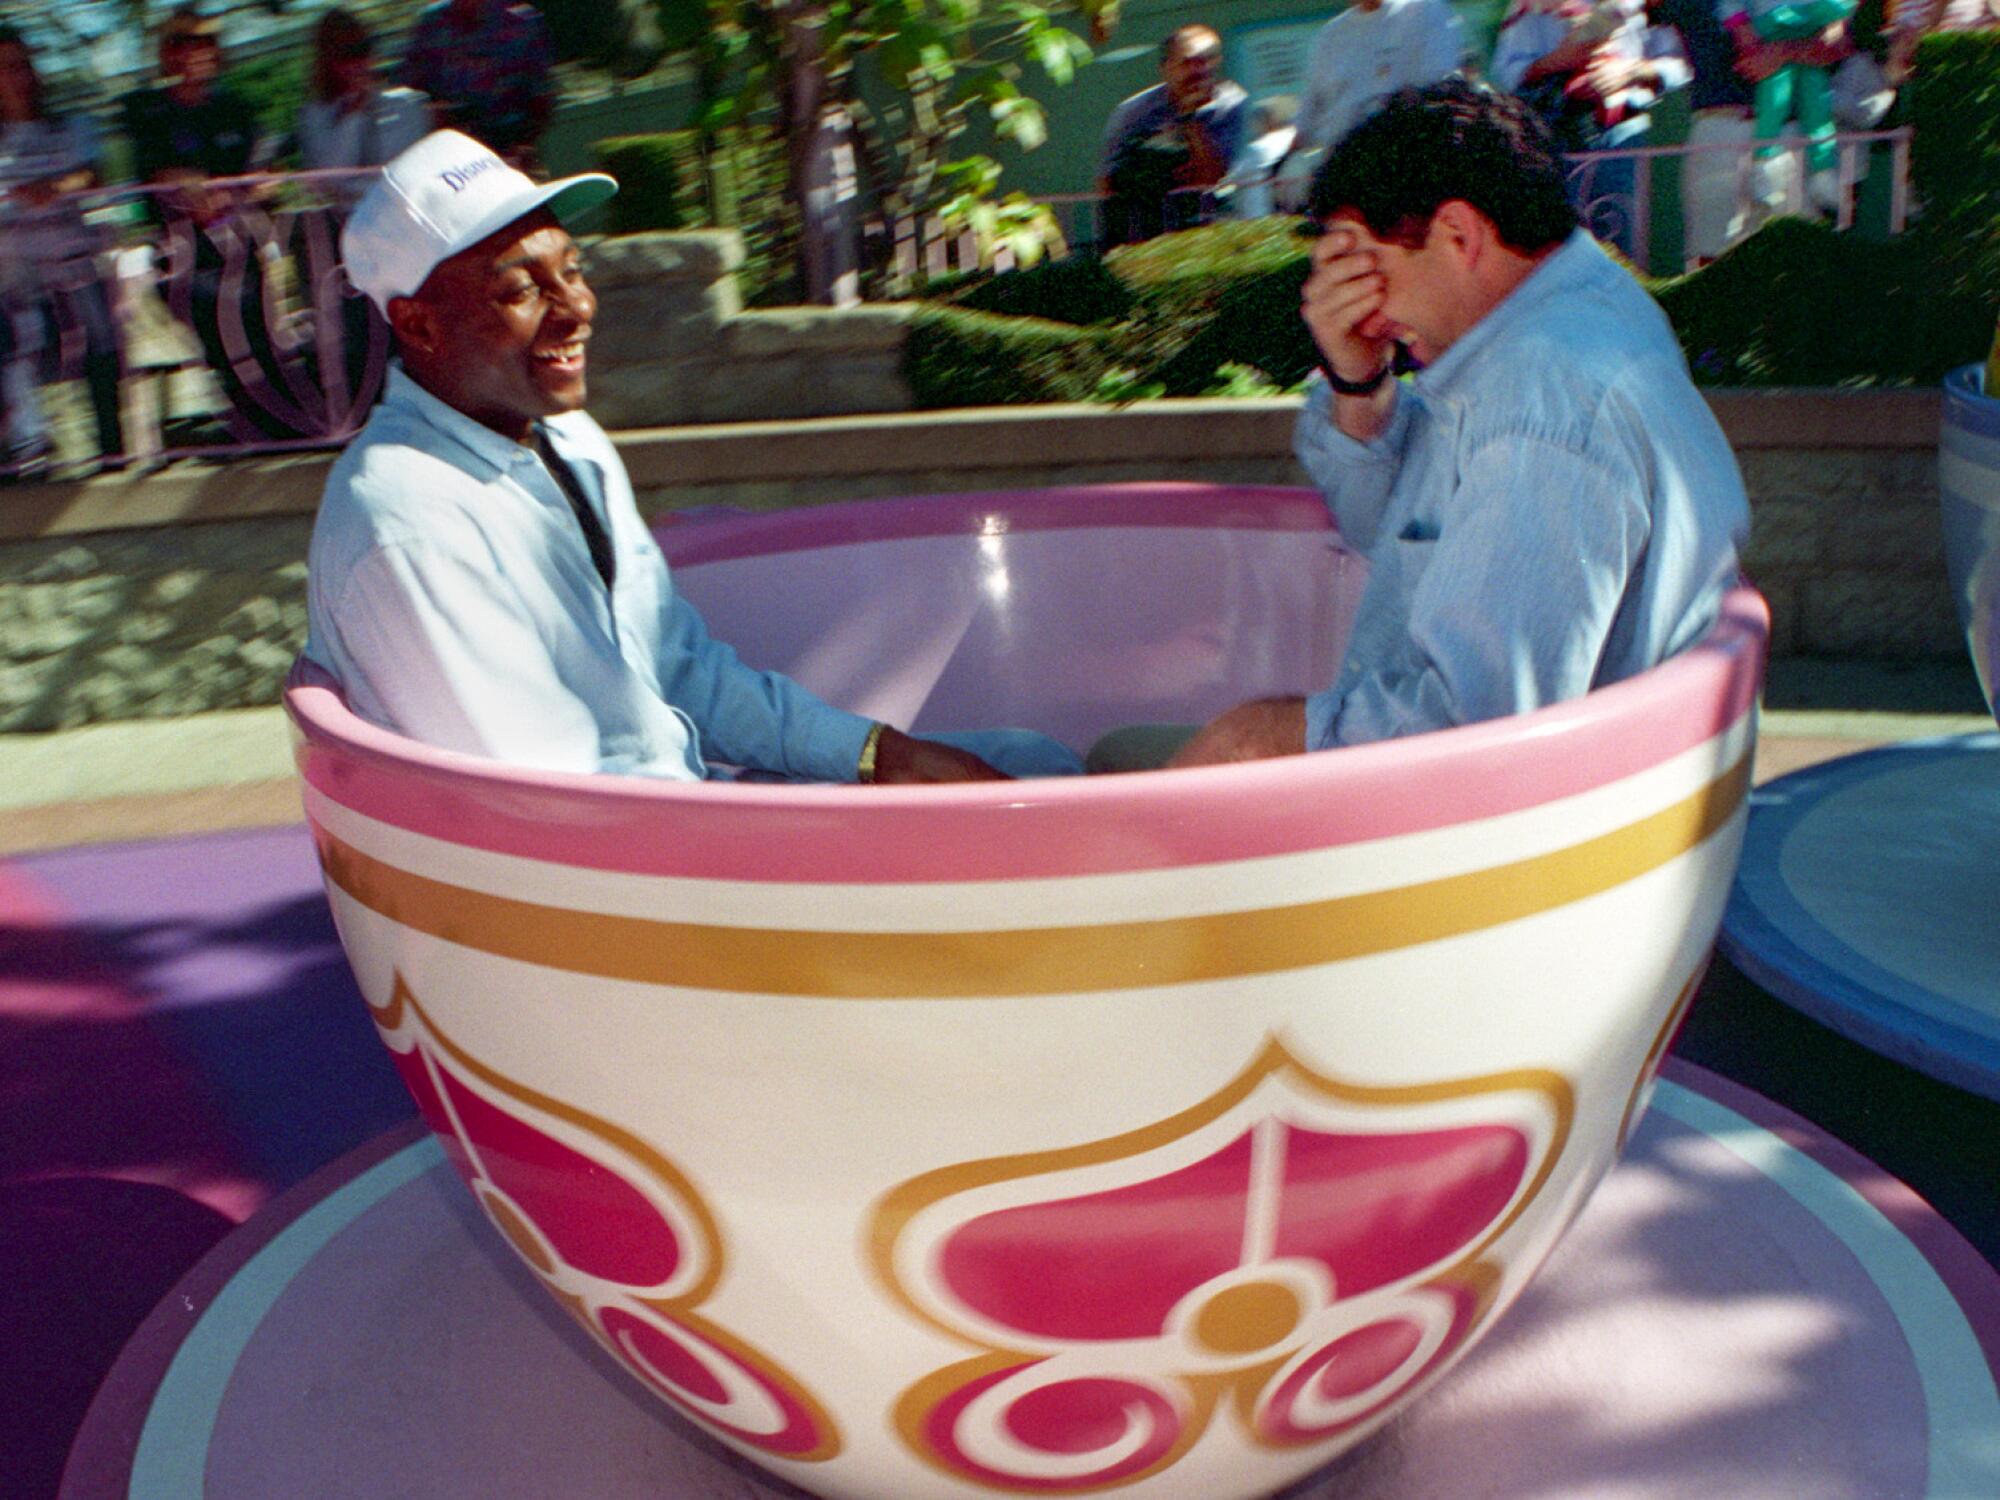 Two men laugh while riding a spinning teacup at Disneyland.